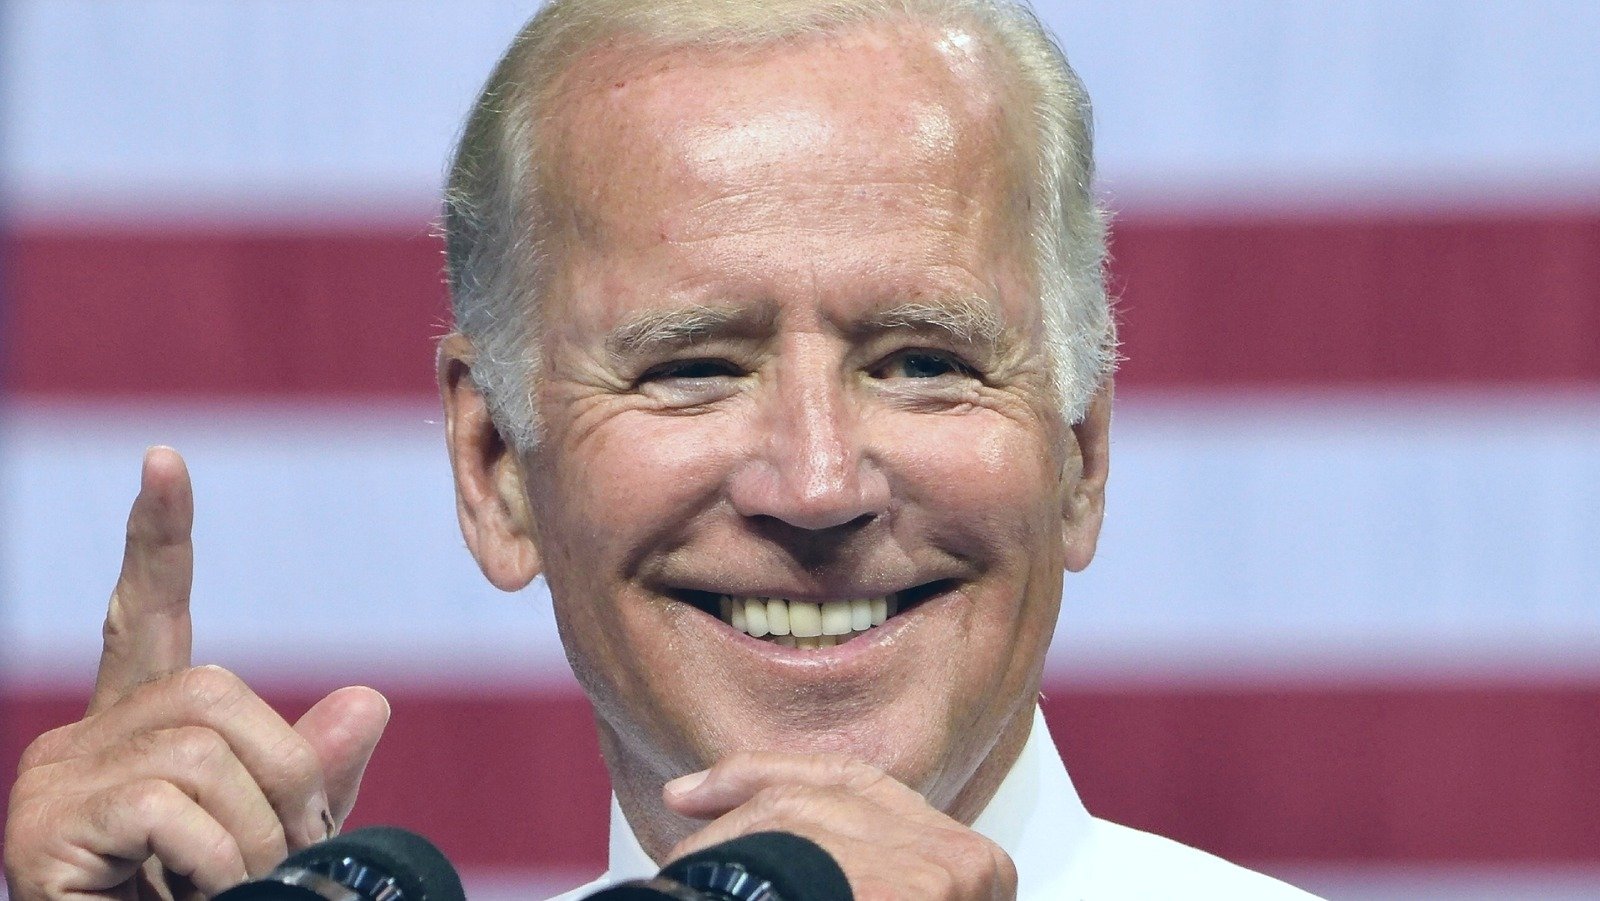 Joe Biden Hands Out This Sweet Treat To His Oval Office Visitors